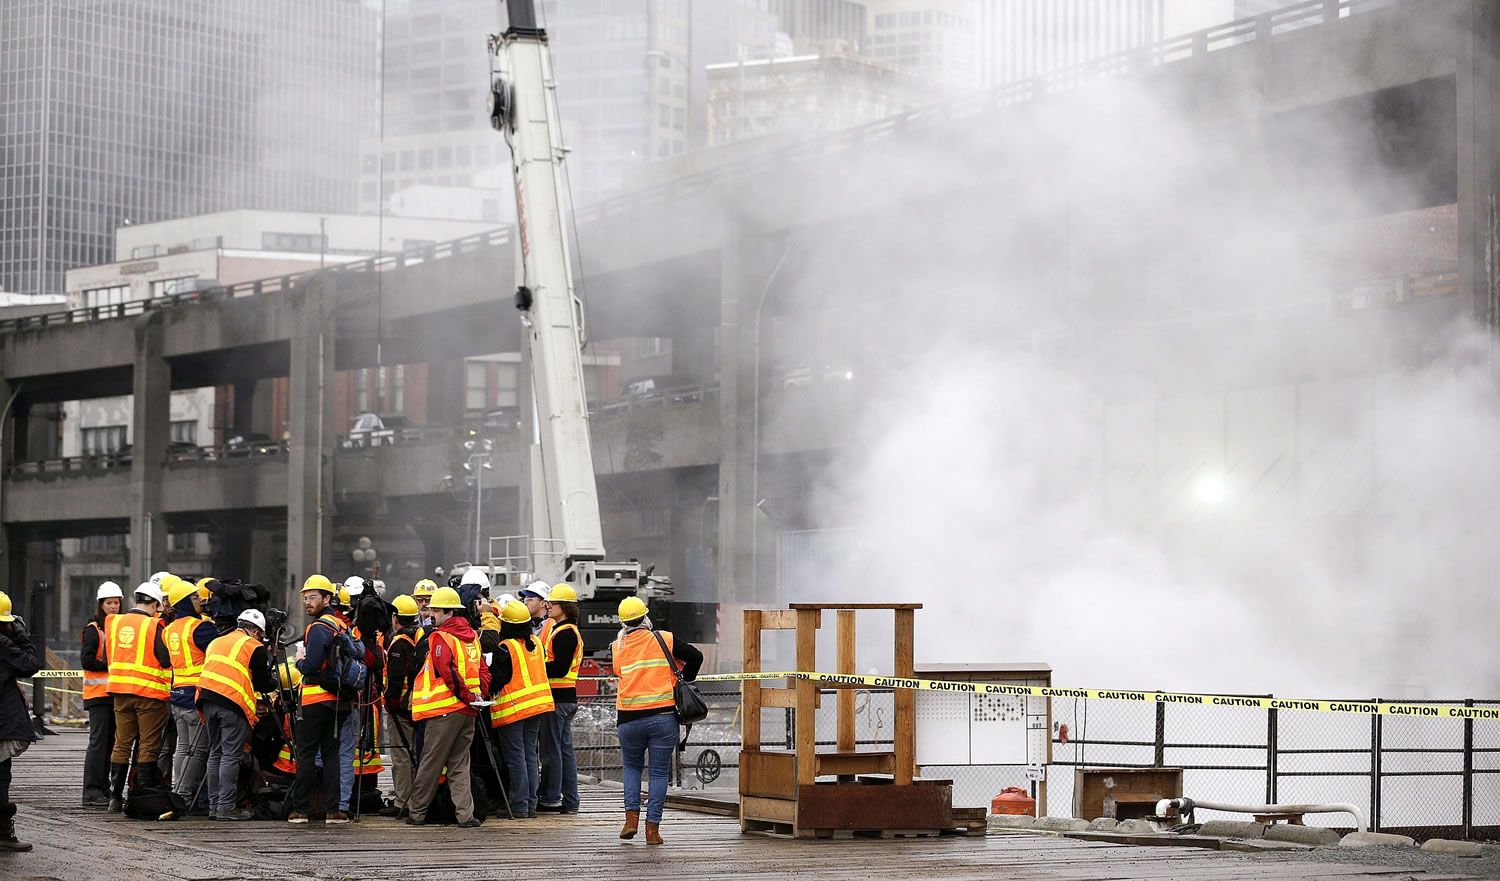 A cloud of concrete dust mixed with steam fills the air Thursday above an access pit for a damaged digging machine for the Highway 99 tunnel project in Seattle.